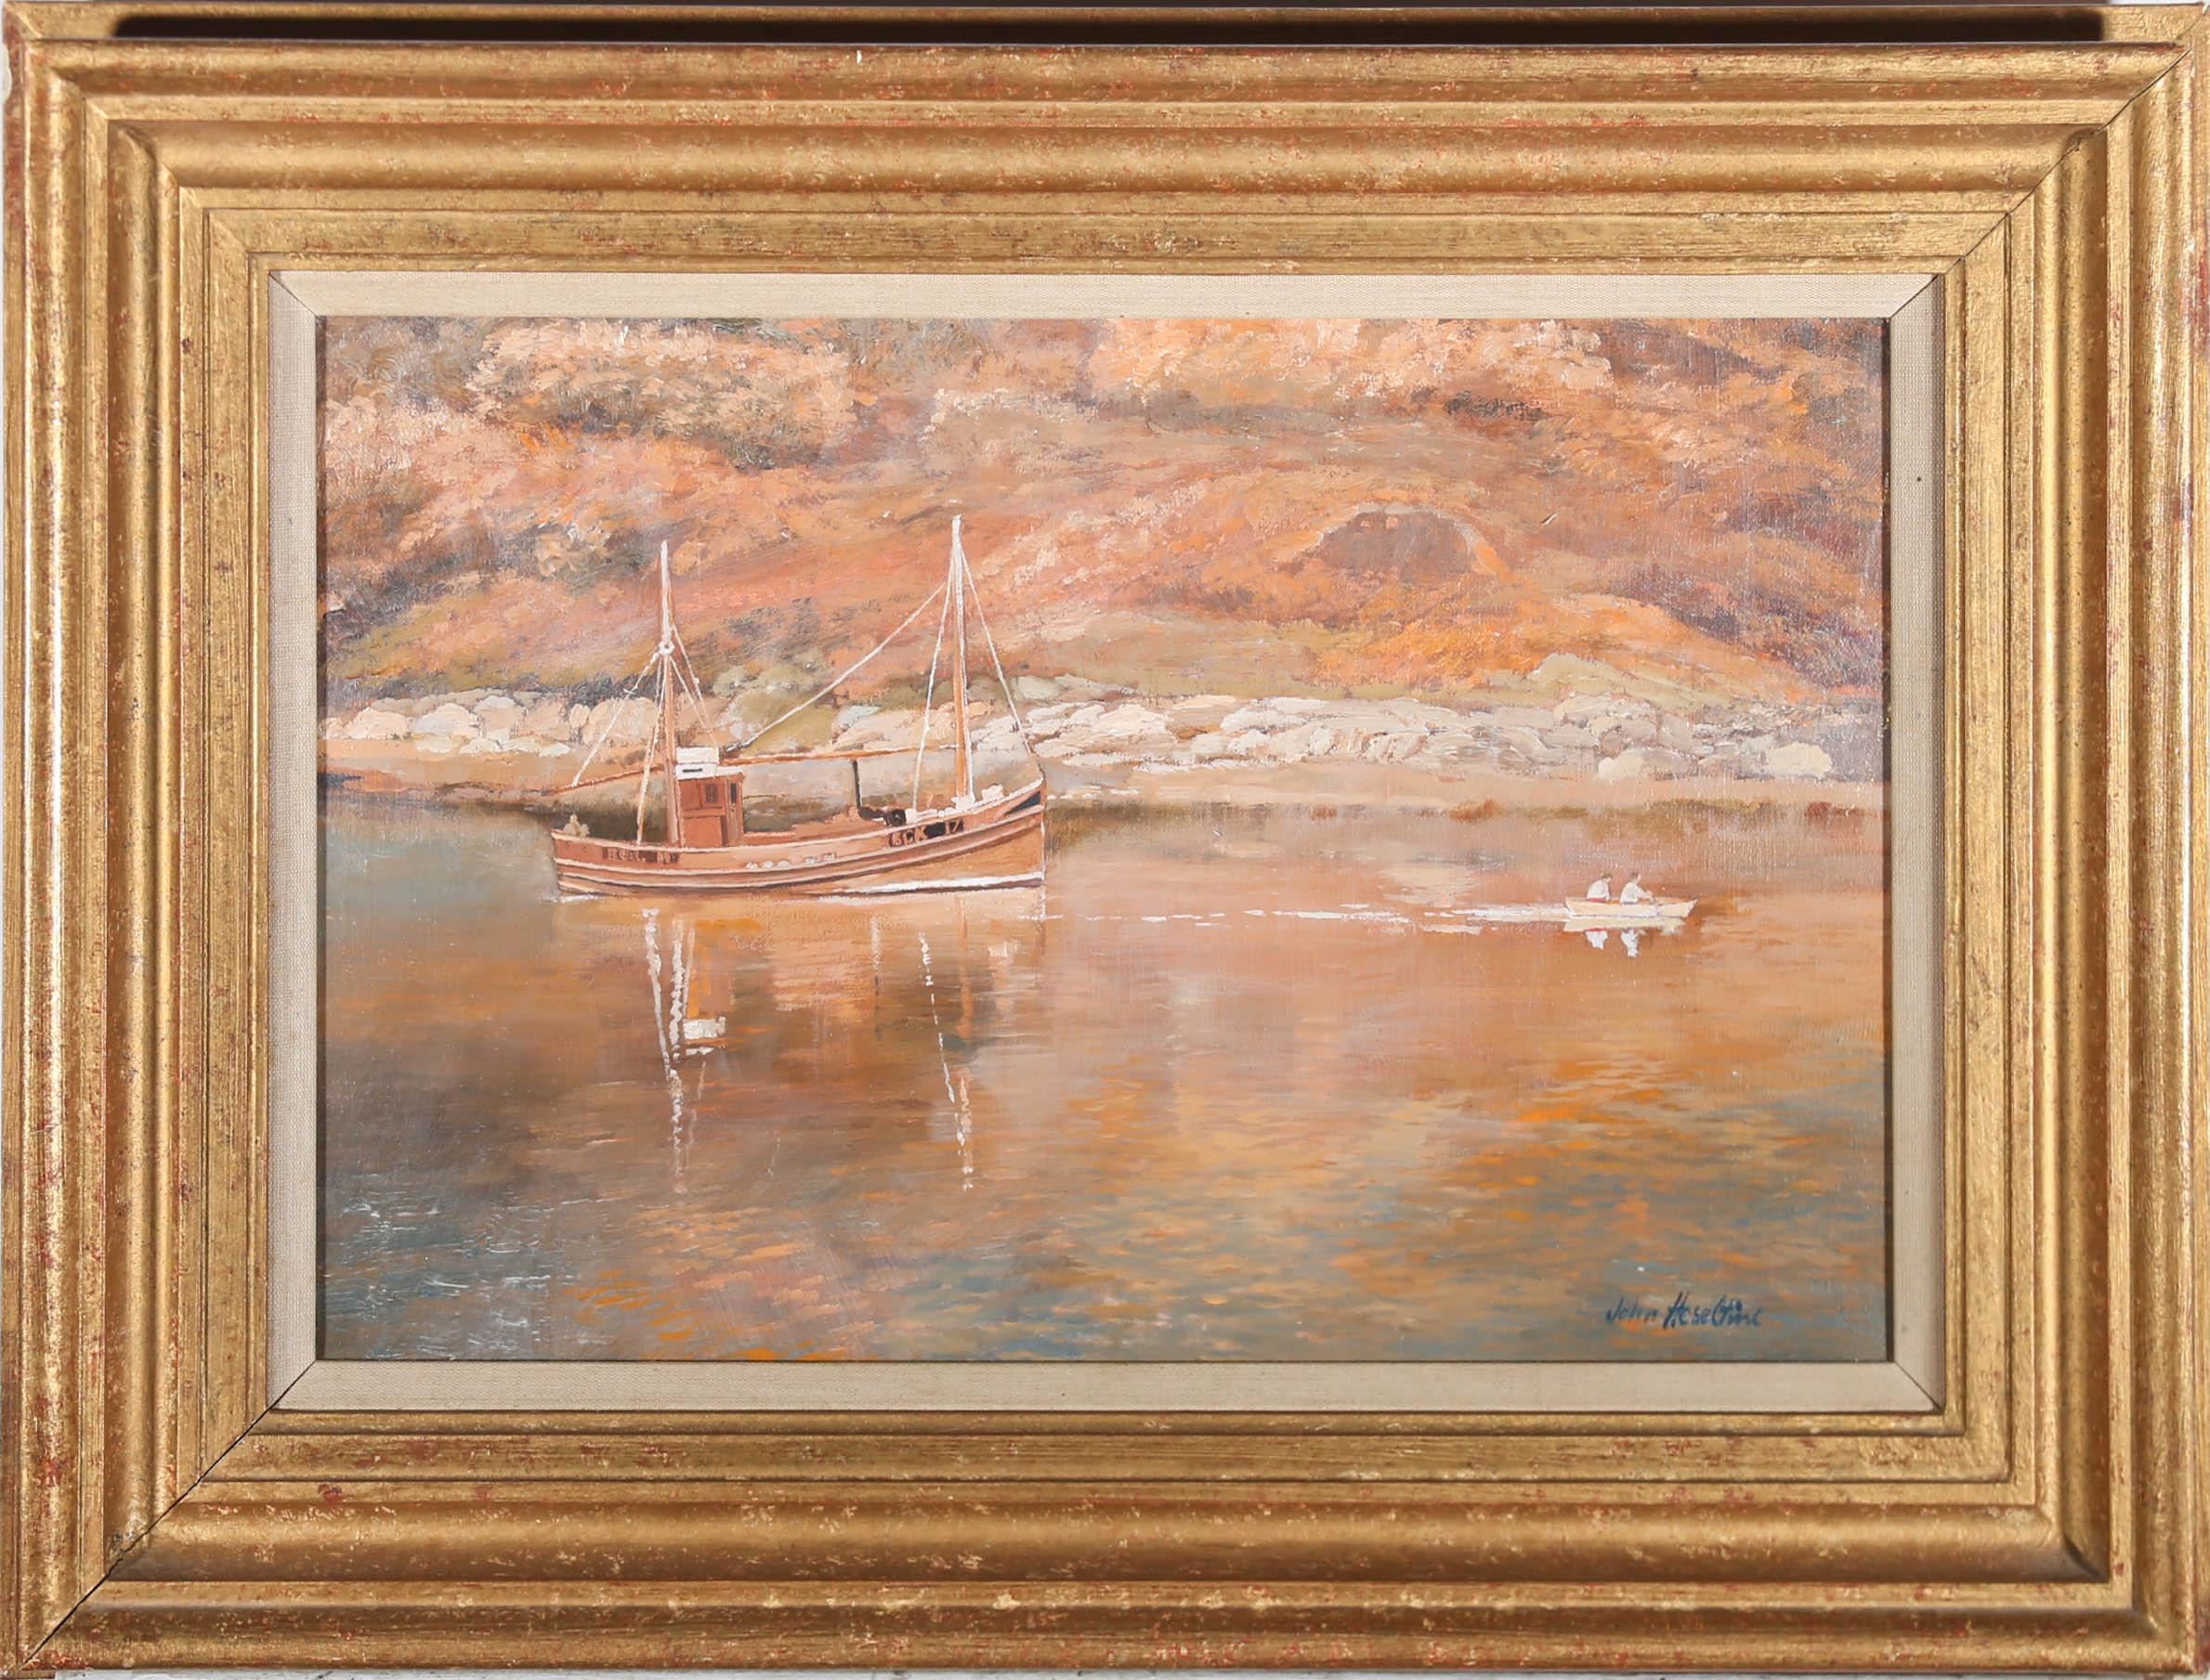 Well presented in a substantial gilt effect frame with canvas slip. Signed. On canvas on stretchers.
